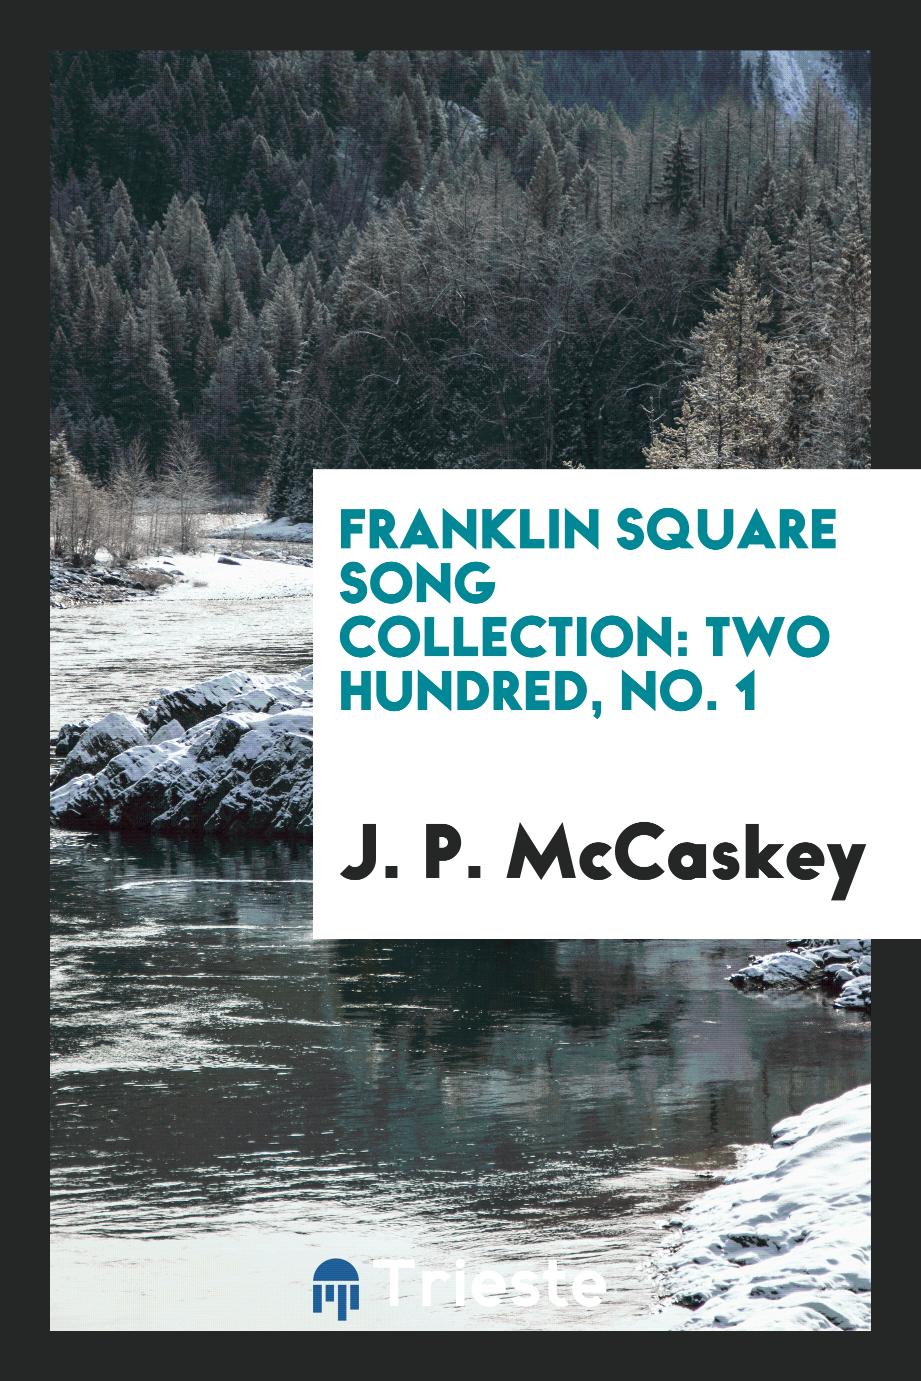 Franklin Square Song Collection: Two Hundred, No. 1